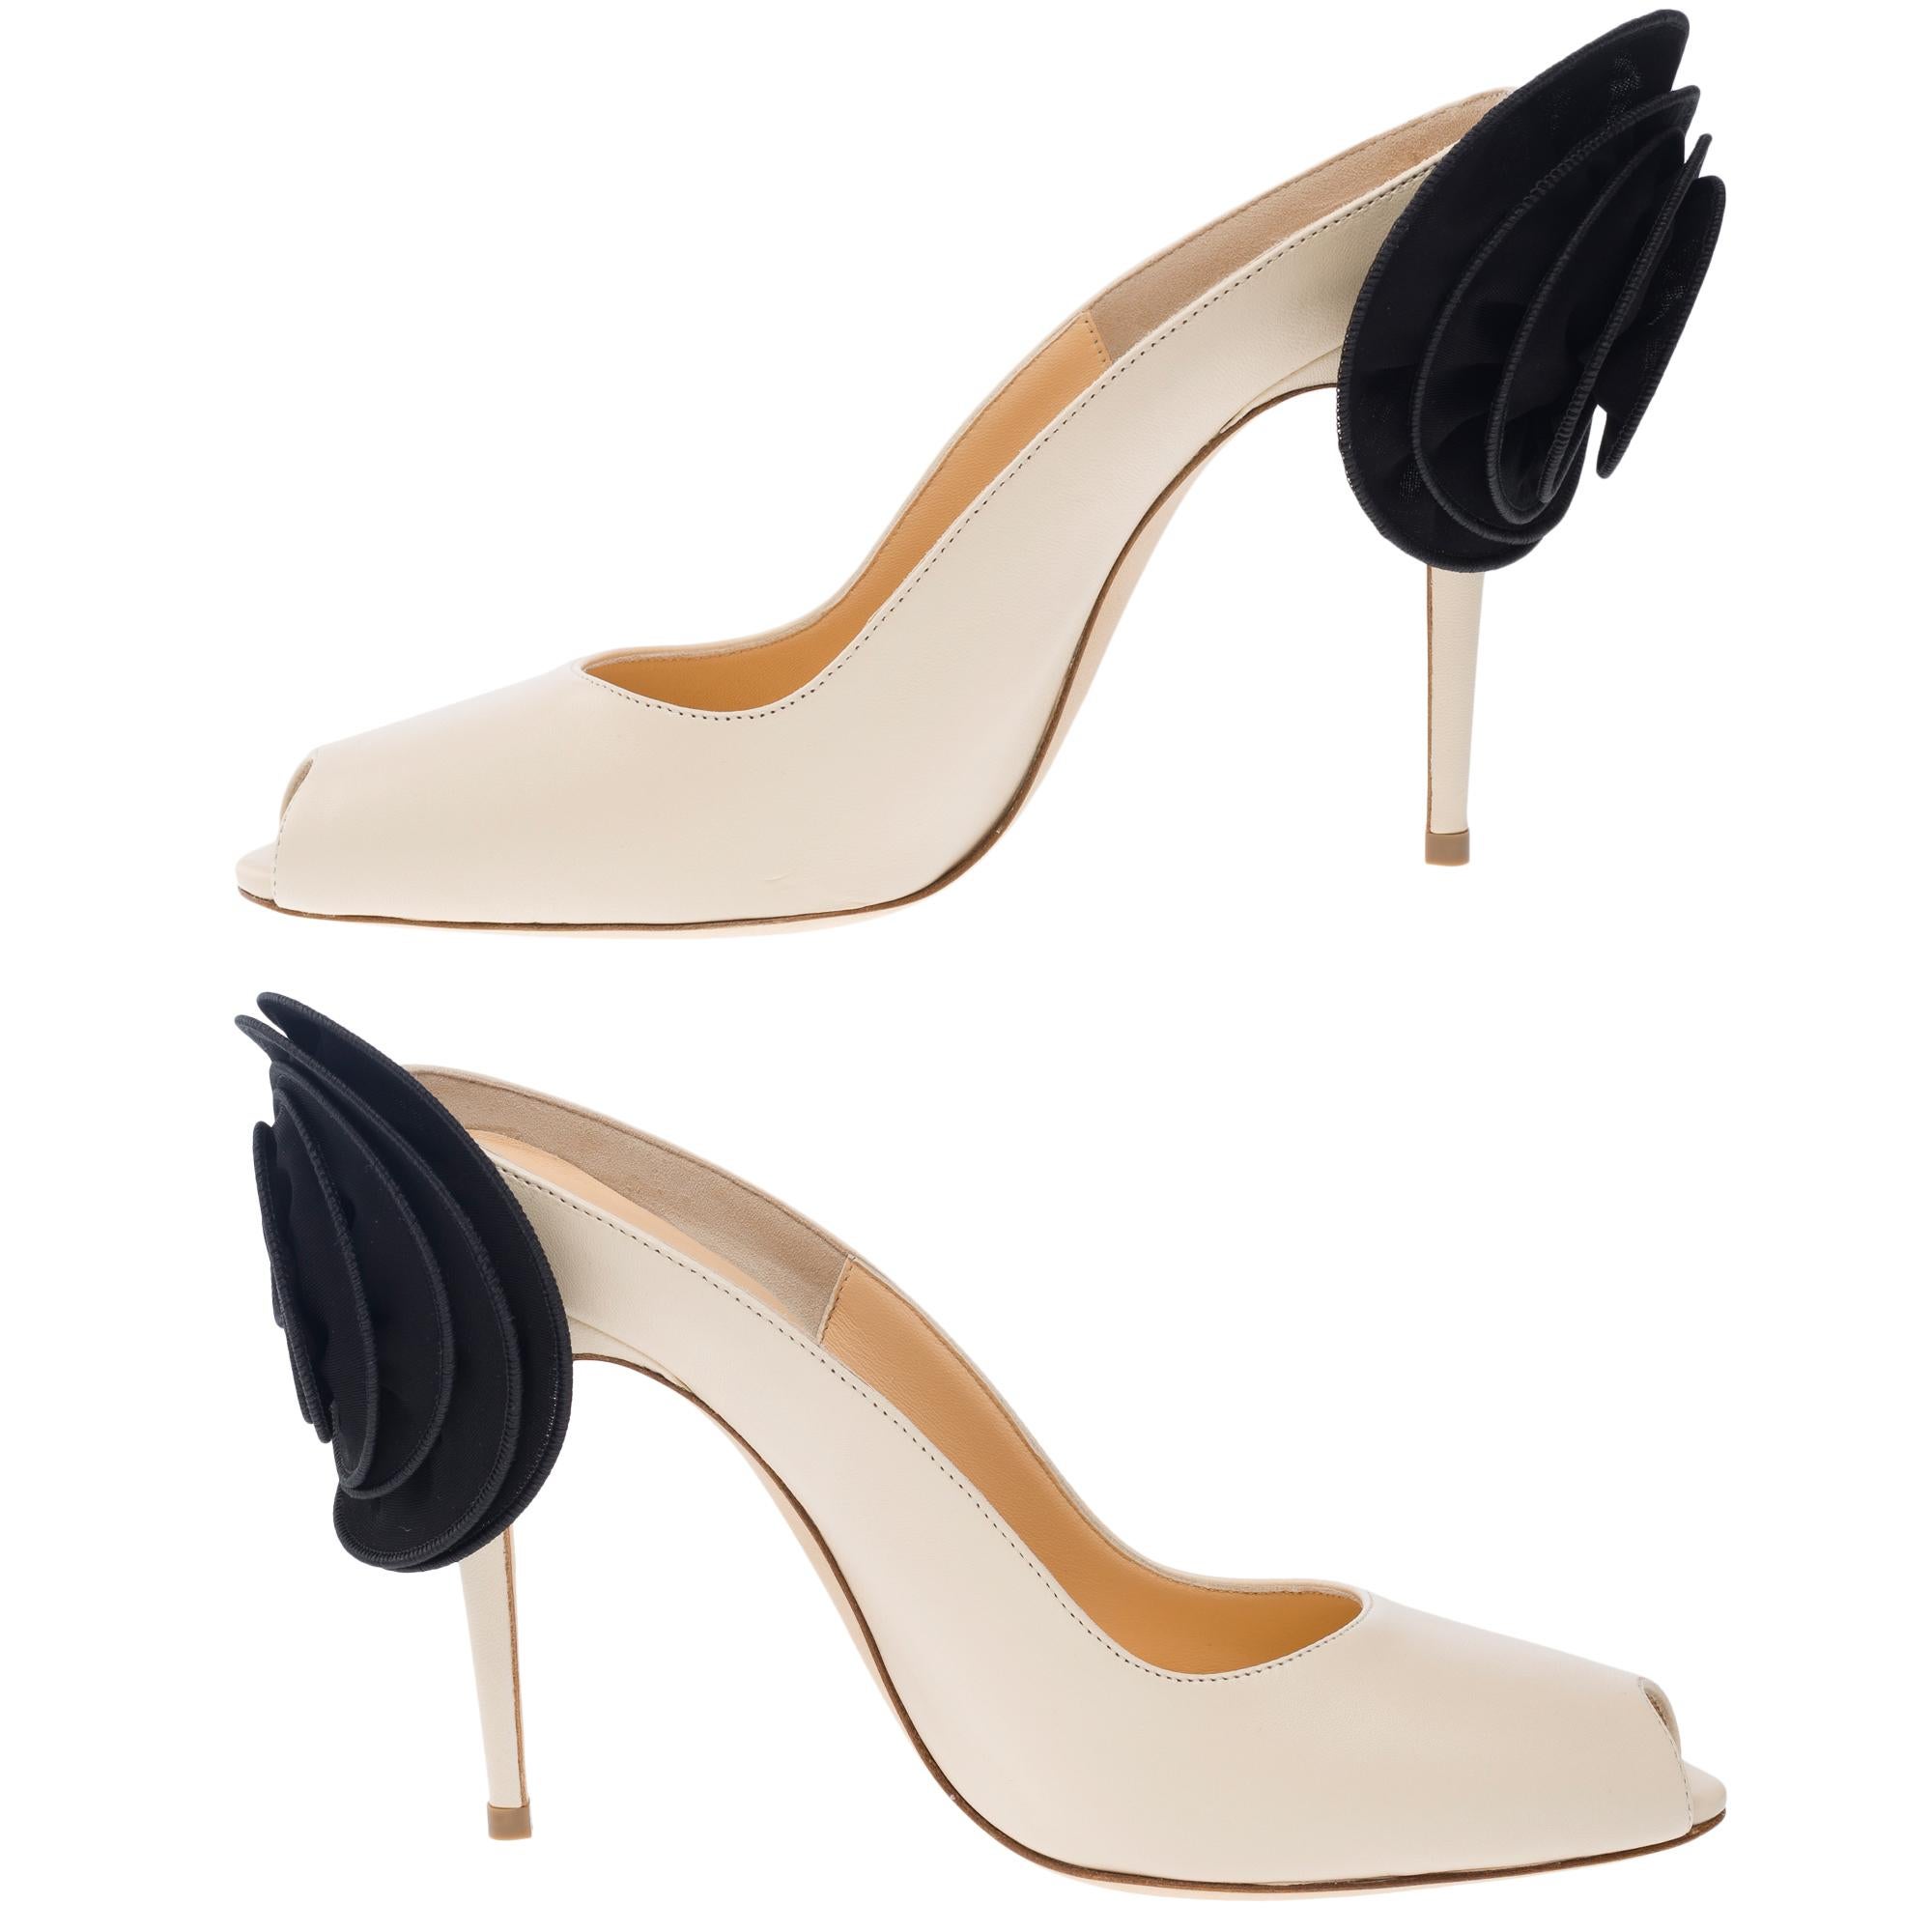 New Magda Butrym Peep Toe Mules in Cream leather , Size 38 For Sale 4